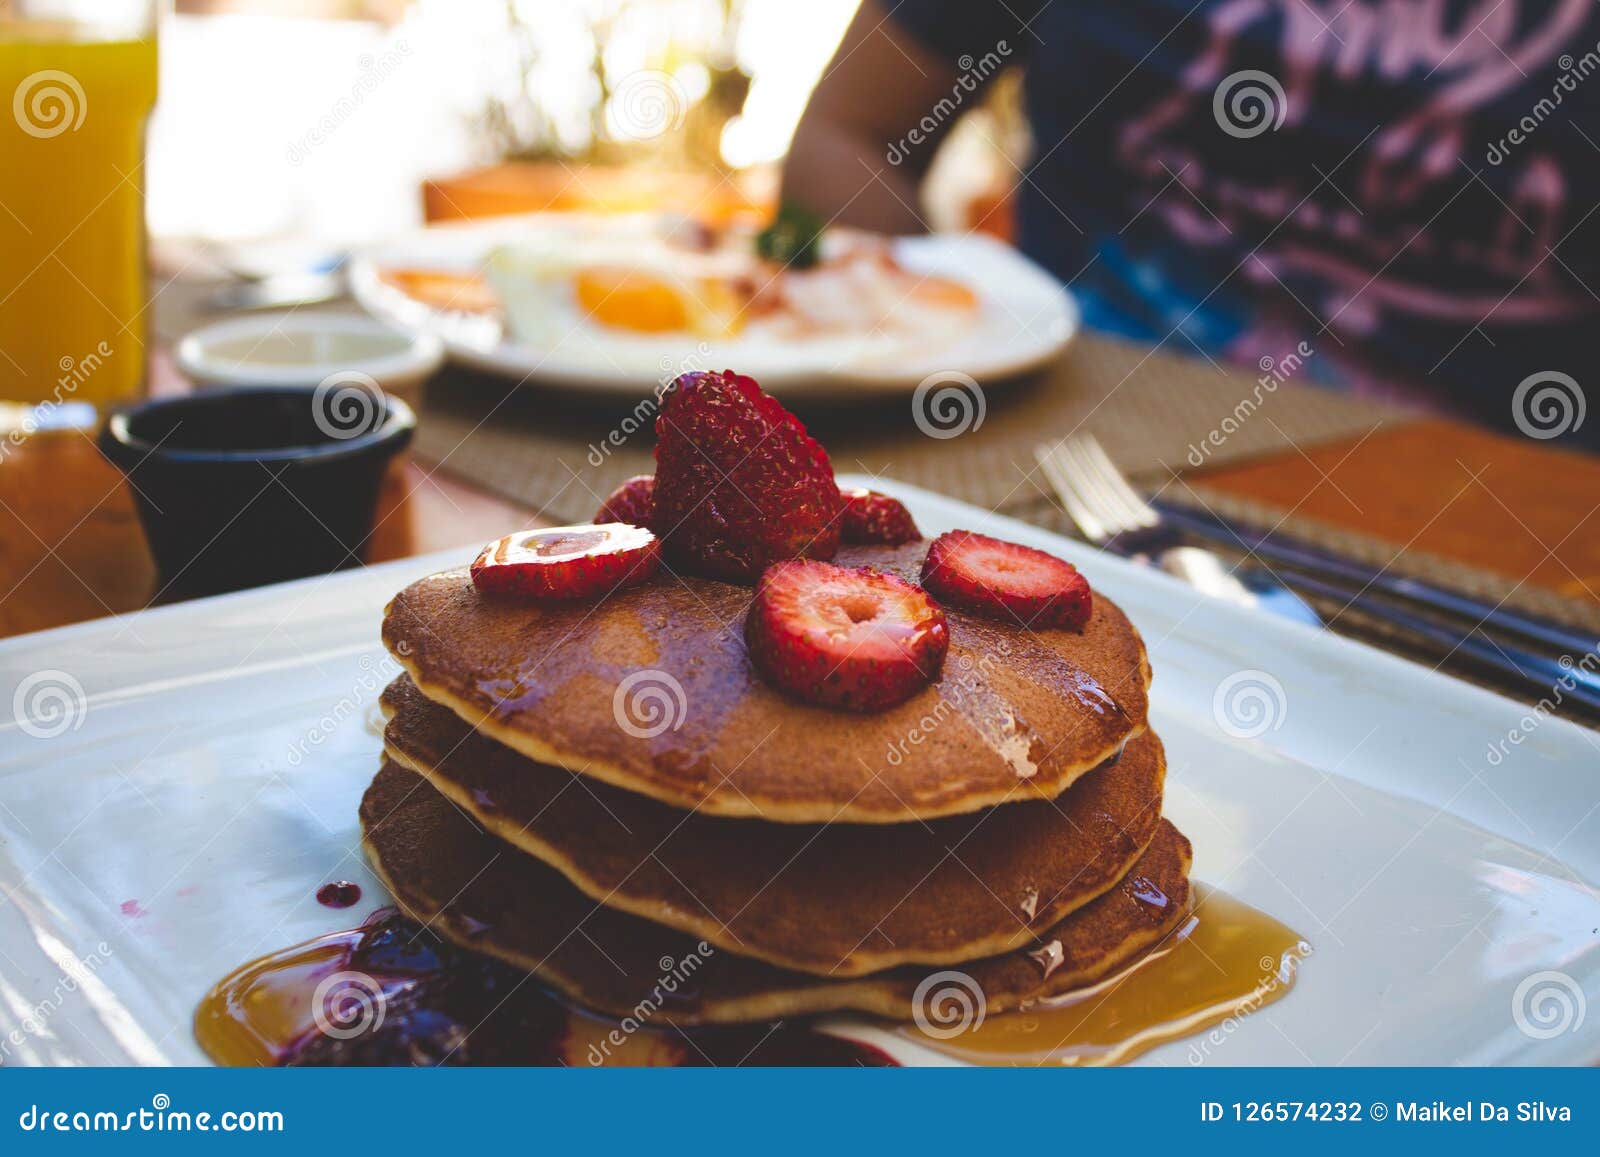 Delicious Breakfast of Pancakes with Syrup and Strawberries. Stock ...